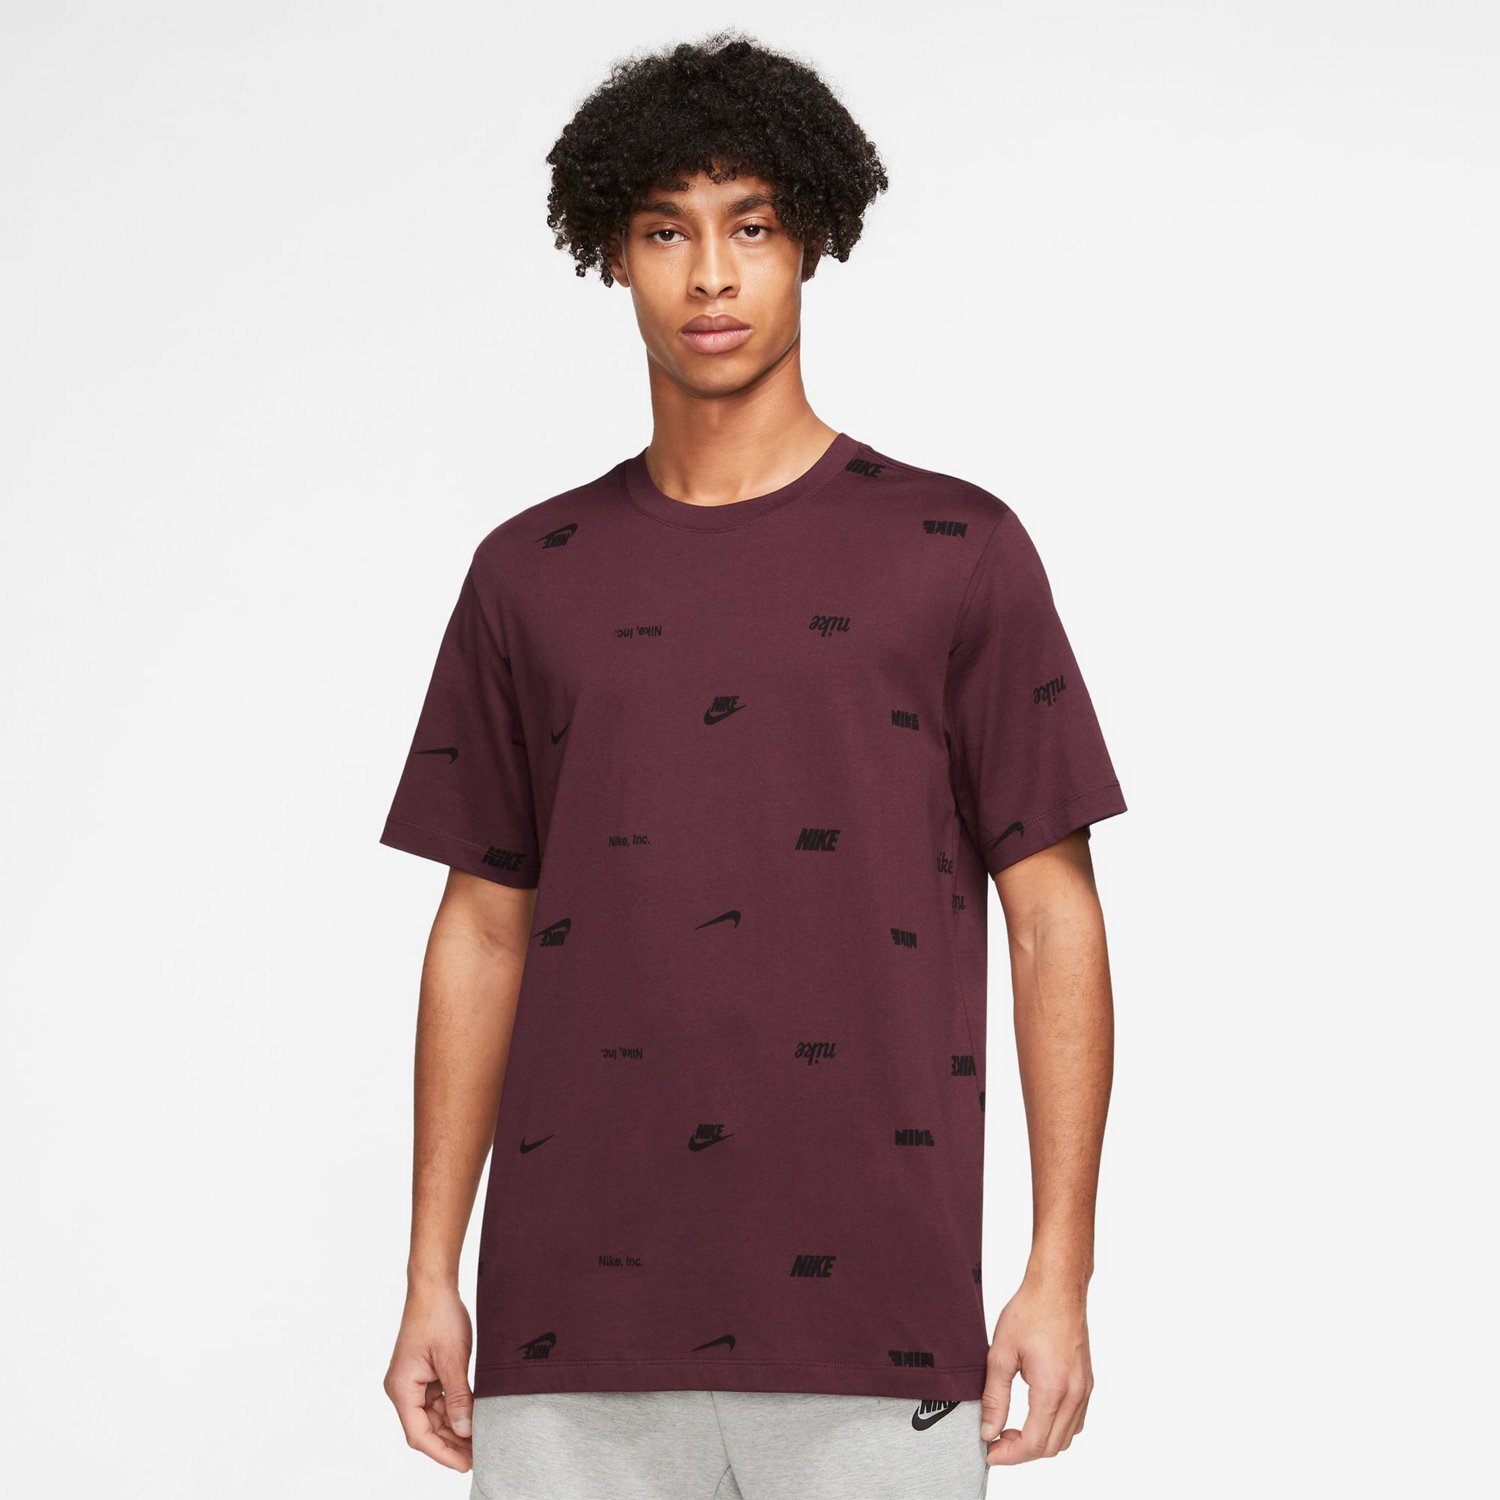 Nike Men's Club+ Allover Print T-shirt | Free Shipping at Academy